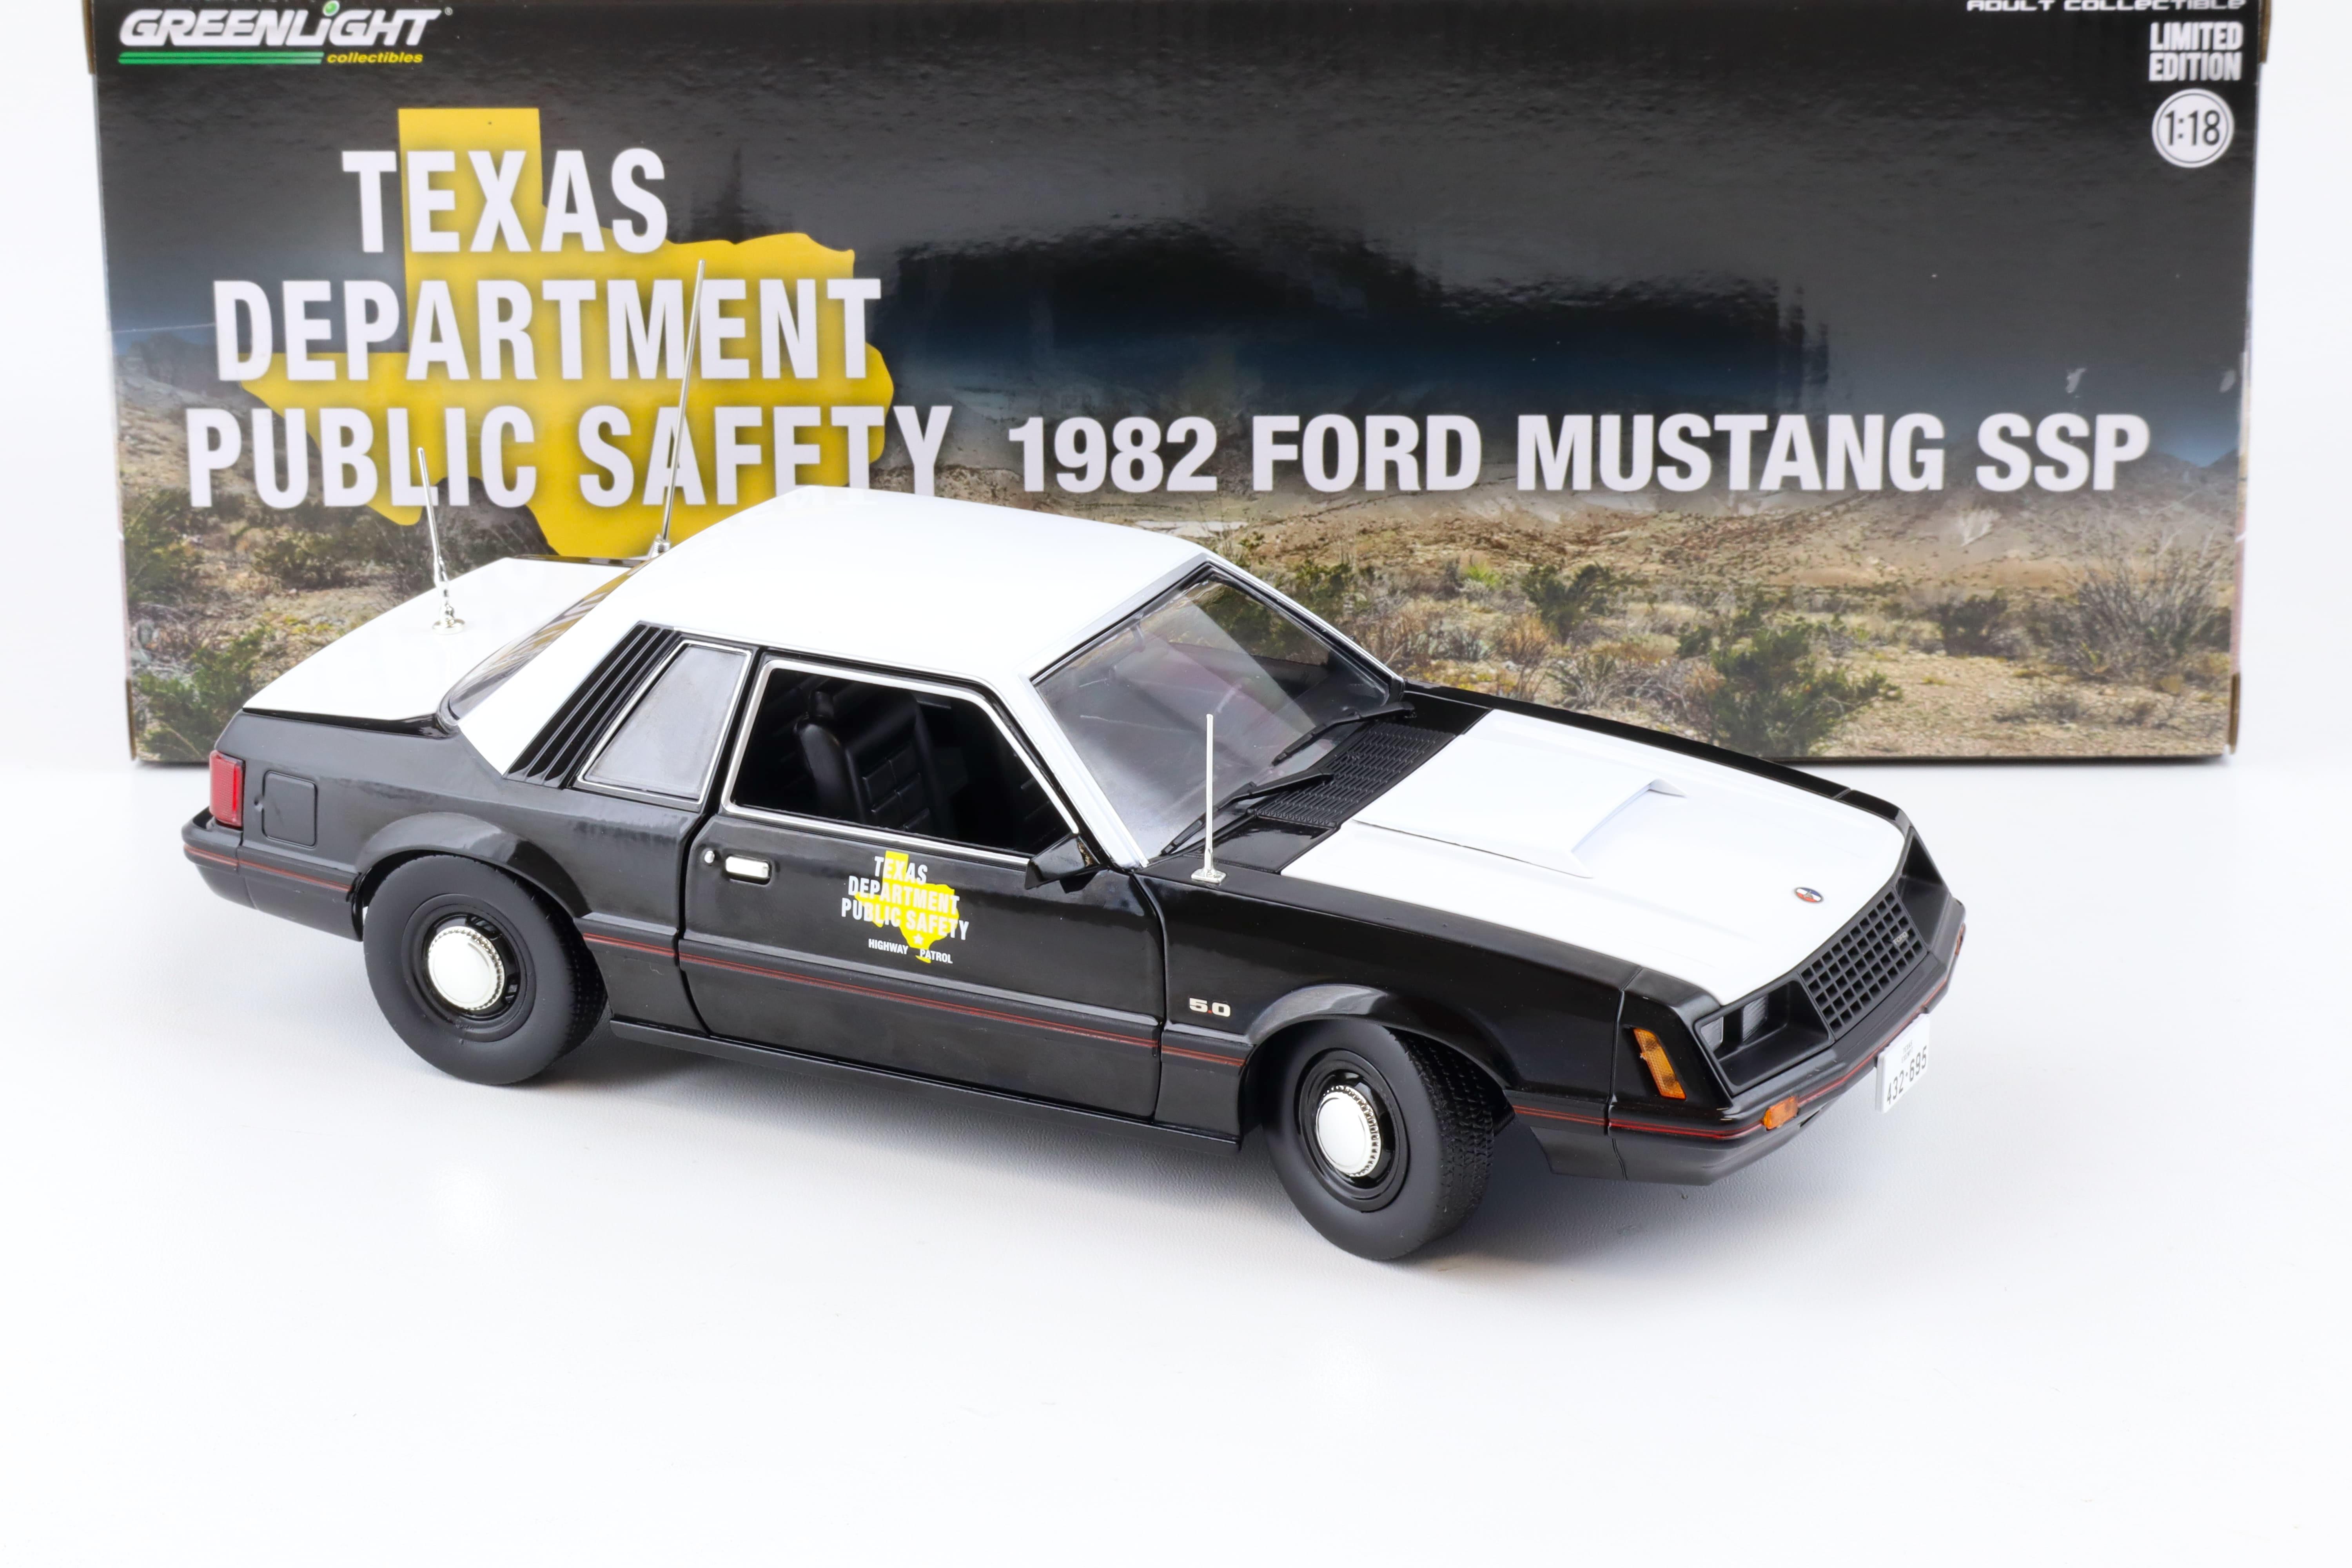 1:18 Greenlight 1982 Ford Mustang 5.0 Coupe SSP Texas Department Public Safety